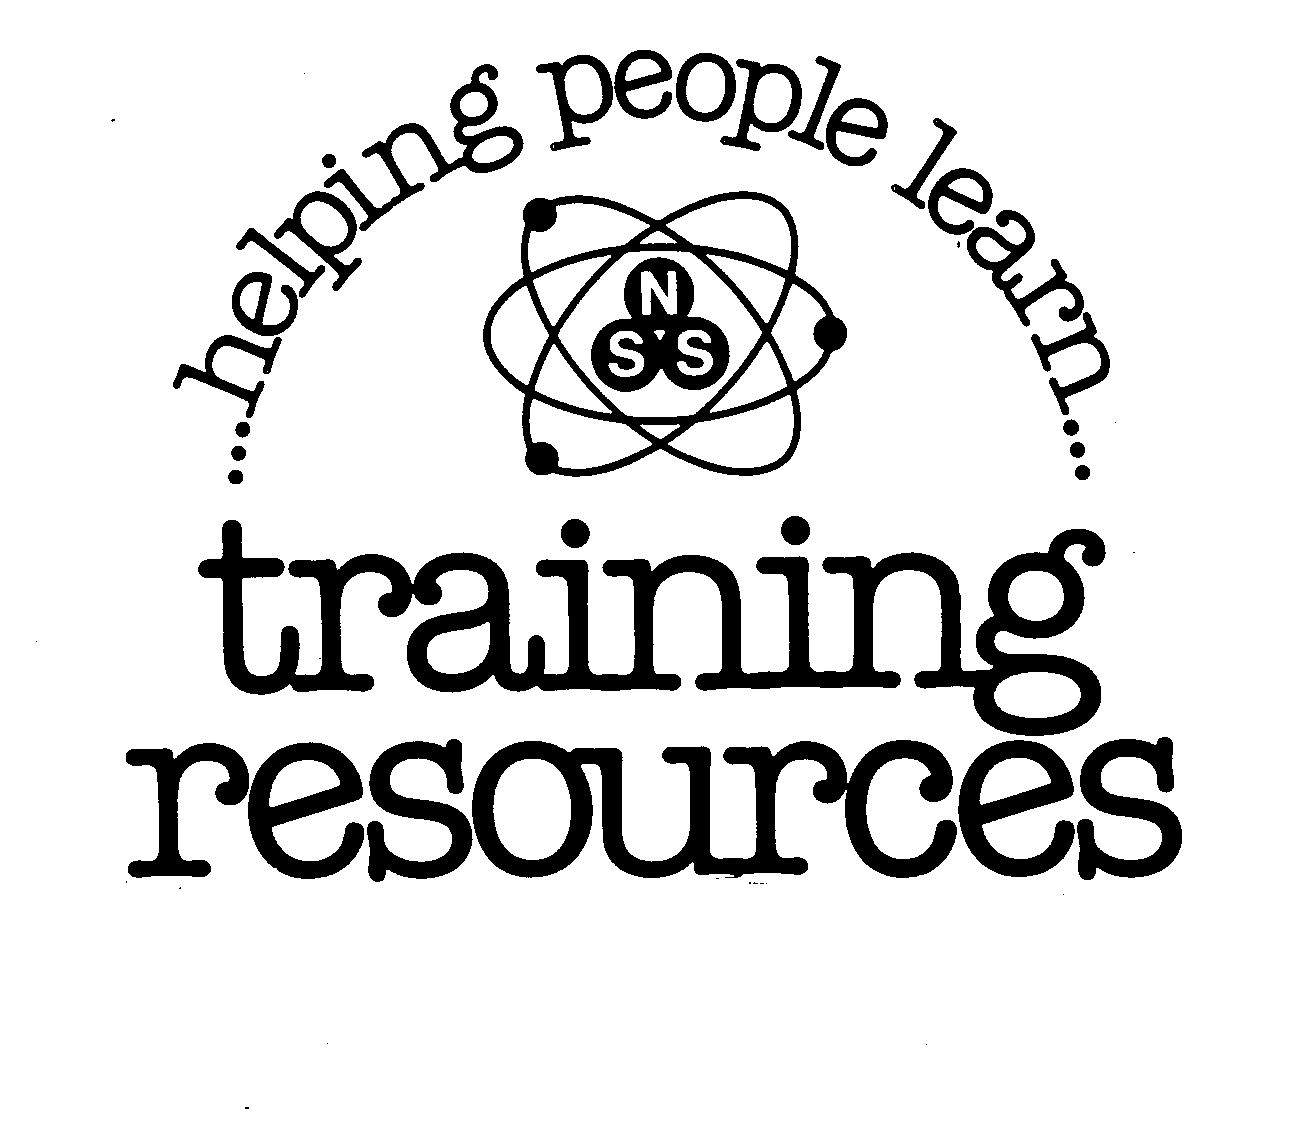  NSS...HELPING PEOPLE LEARN...TRAINING RESOURCES